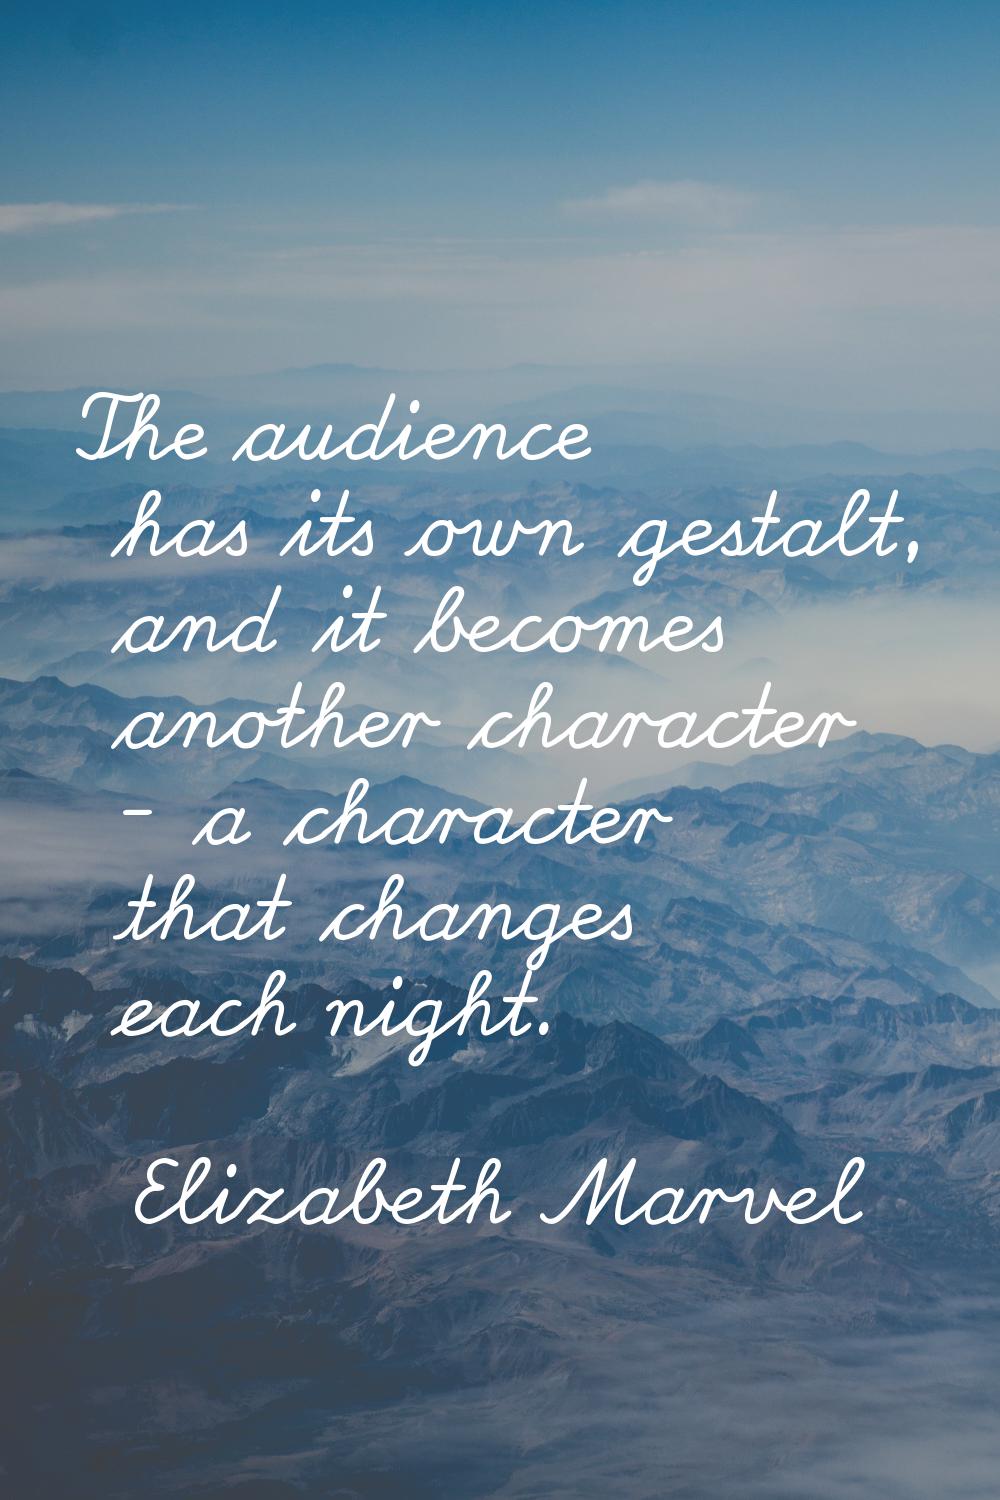 The audience has its own gestalt, and it becomes another character - a character that changes each 